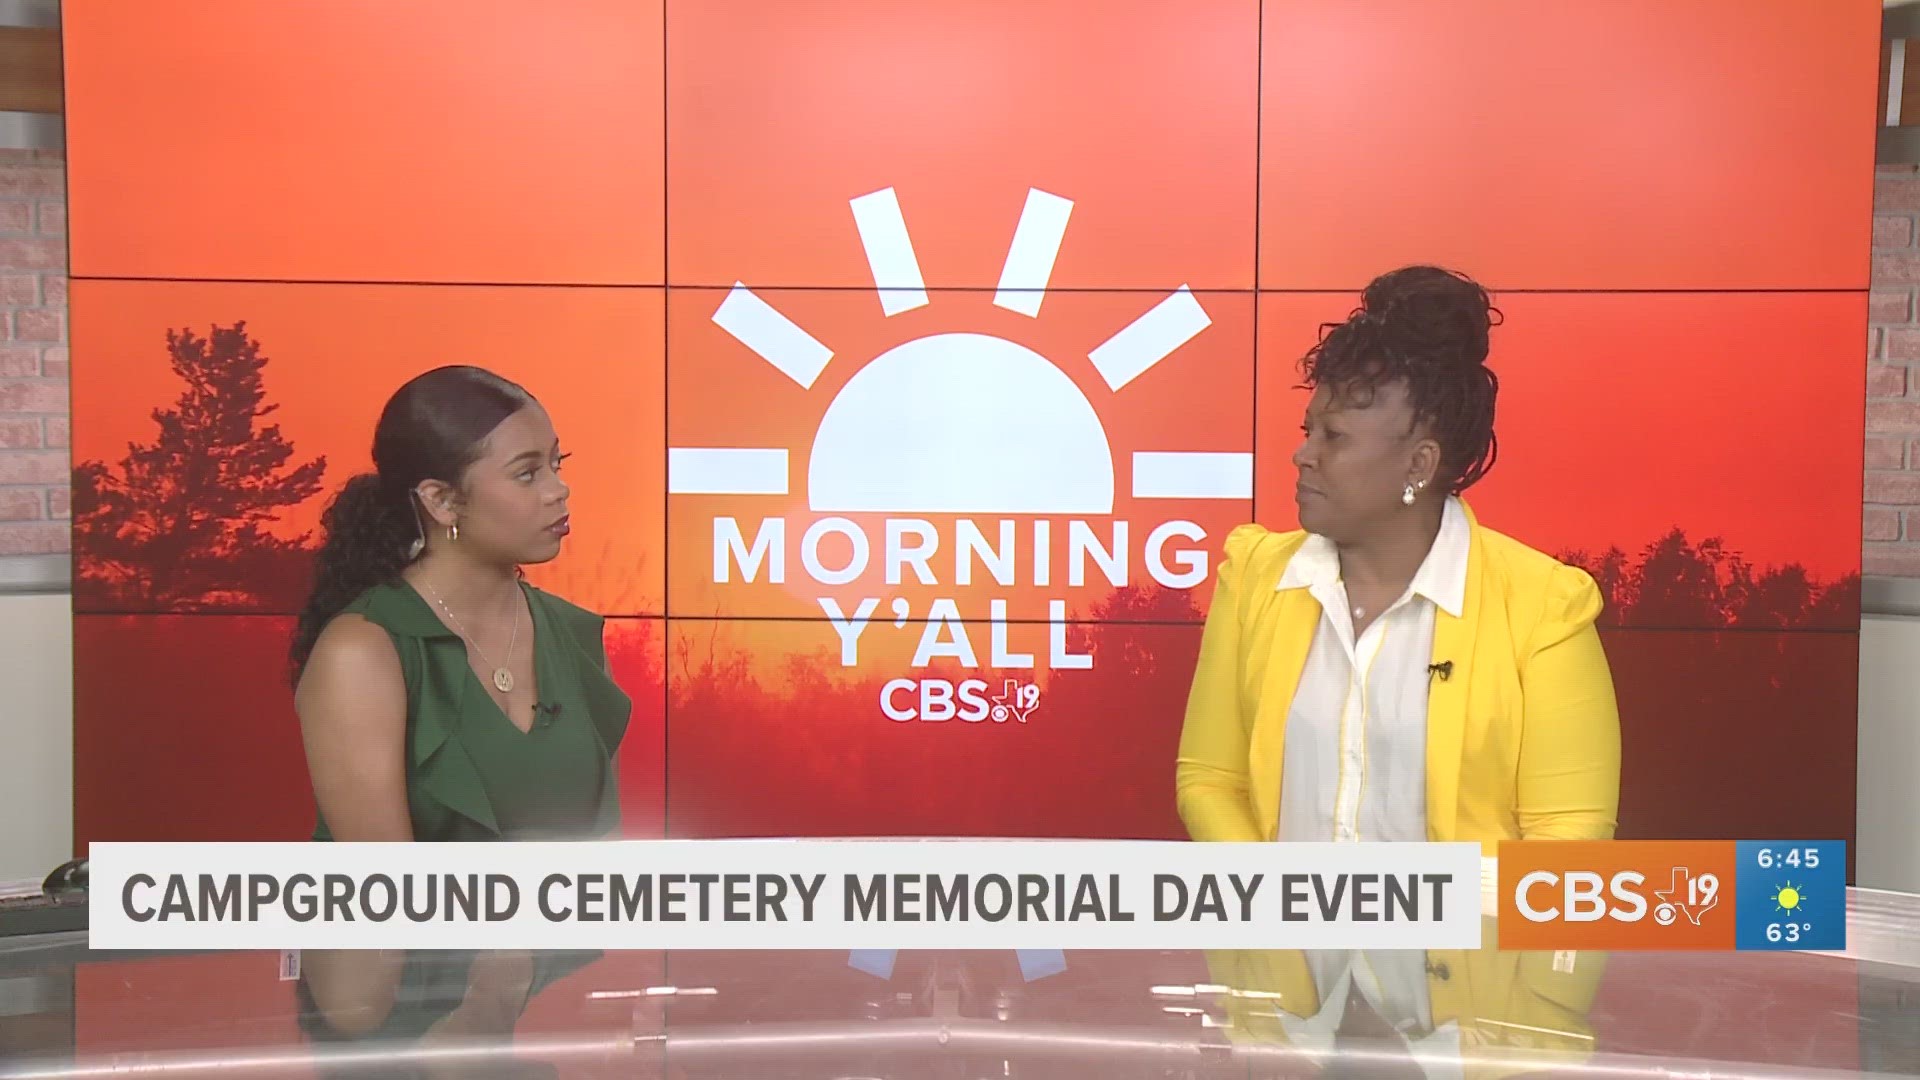 There are many events going on around East Texas and one of those will take place at the Campground Cemetery - a historic Black cemetery in Mt. Enterprise.